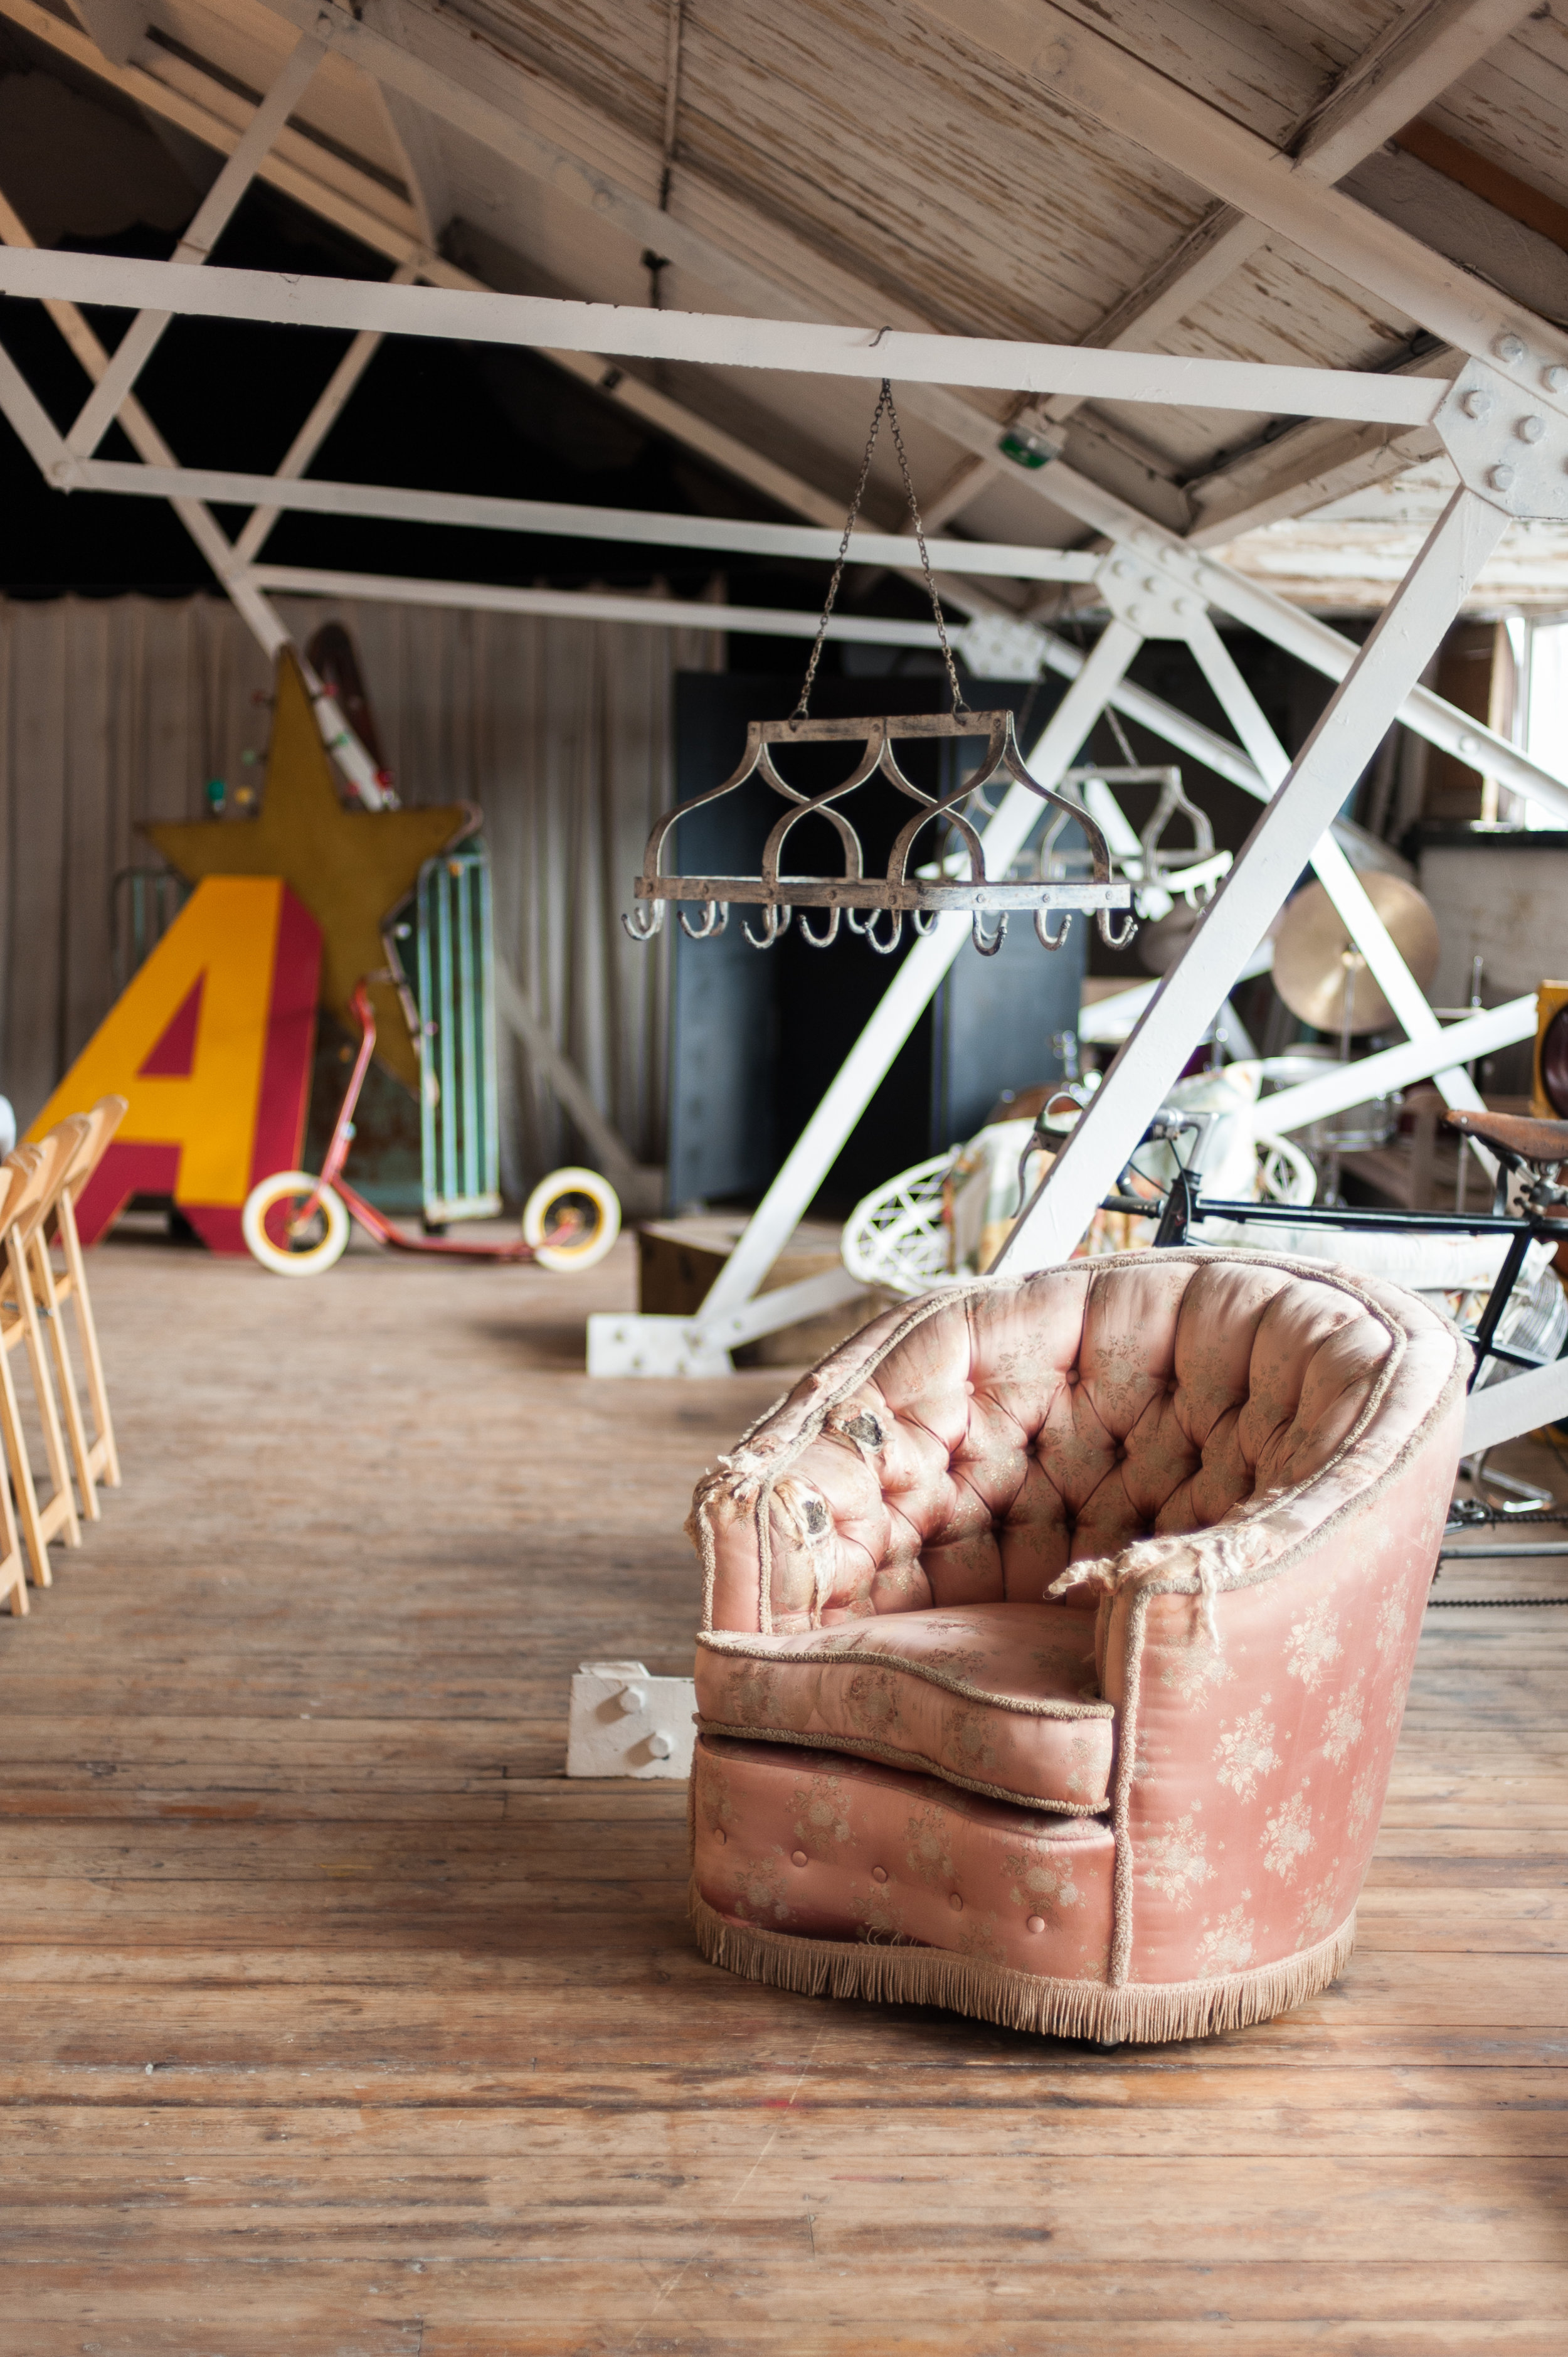  East London Wedding, Dalston Warehouse Wedding, Industrial Chic Wedding Venue, Dry Hire Venue, Exposed Brickworks, Venue with props, Converted Warehouse Venue, Cool venue, Quirky venue, Warehouse Wedding Planner, London Wedding Planner, London Weddi